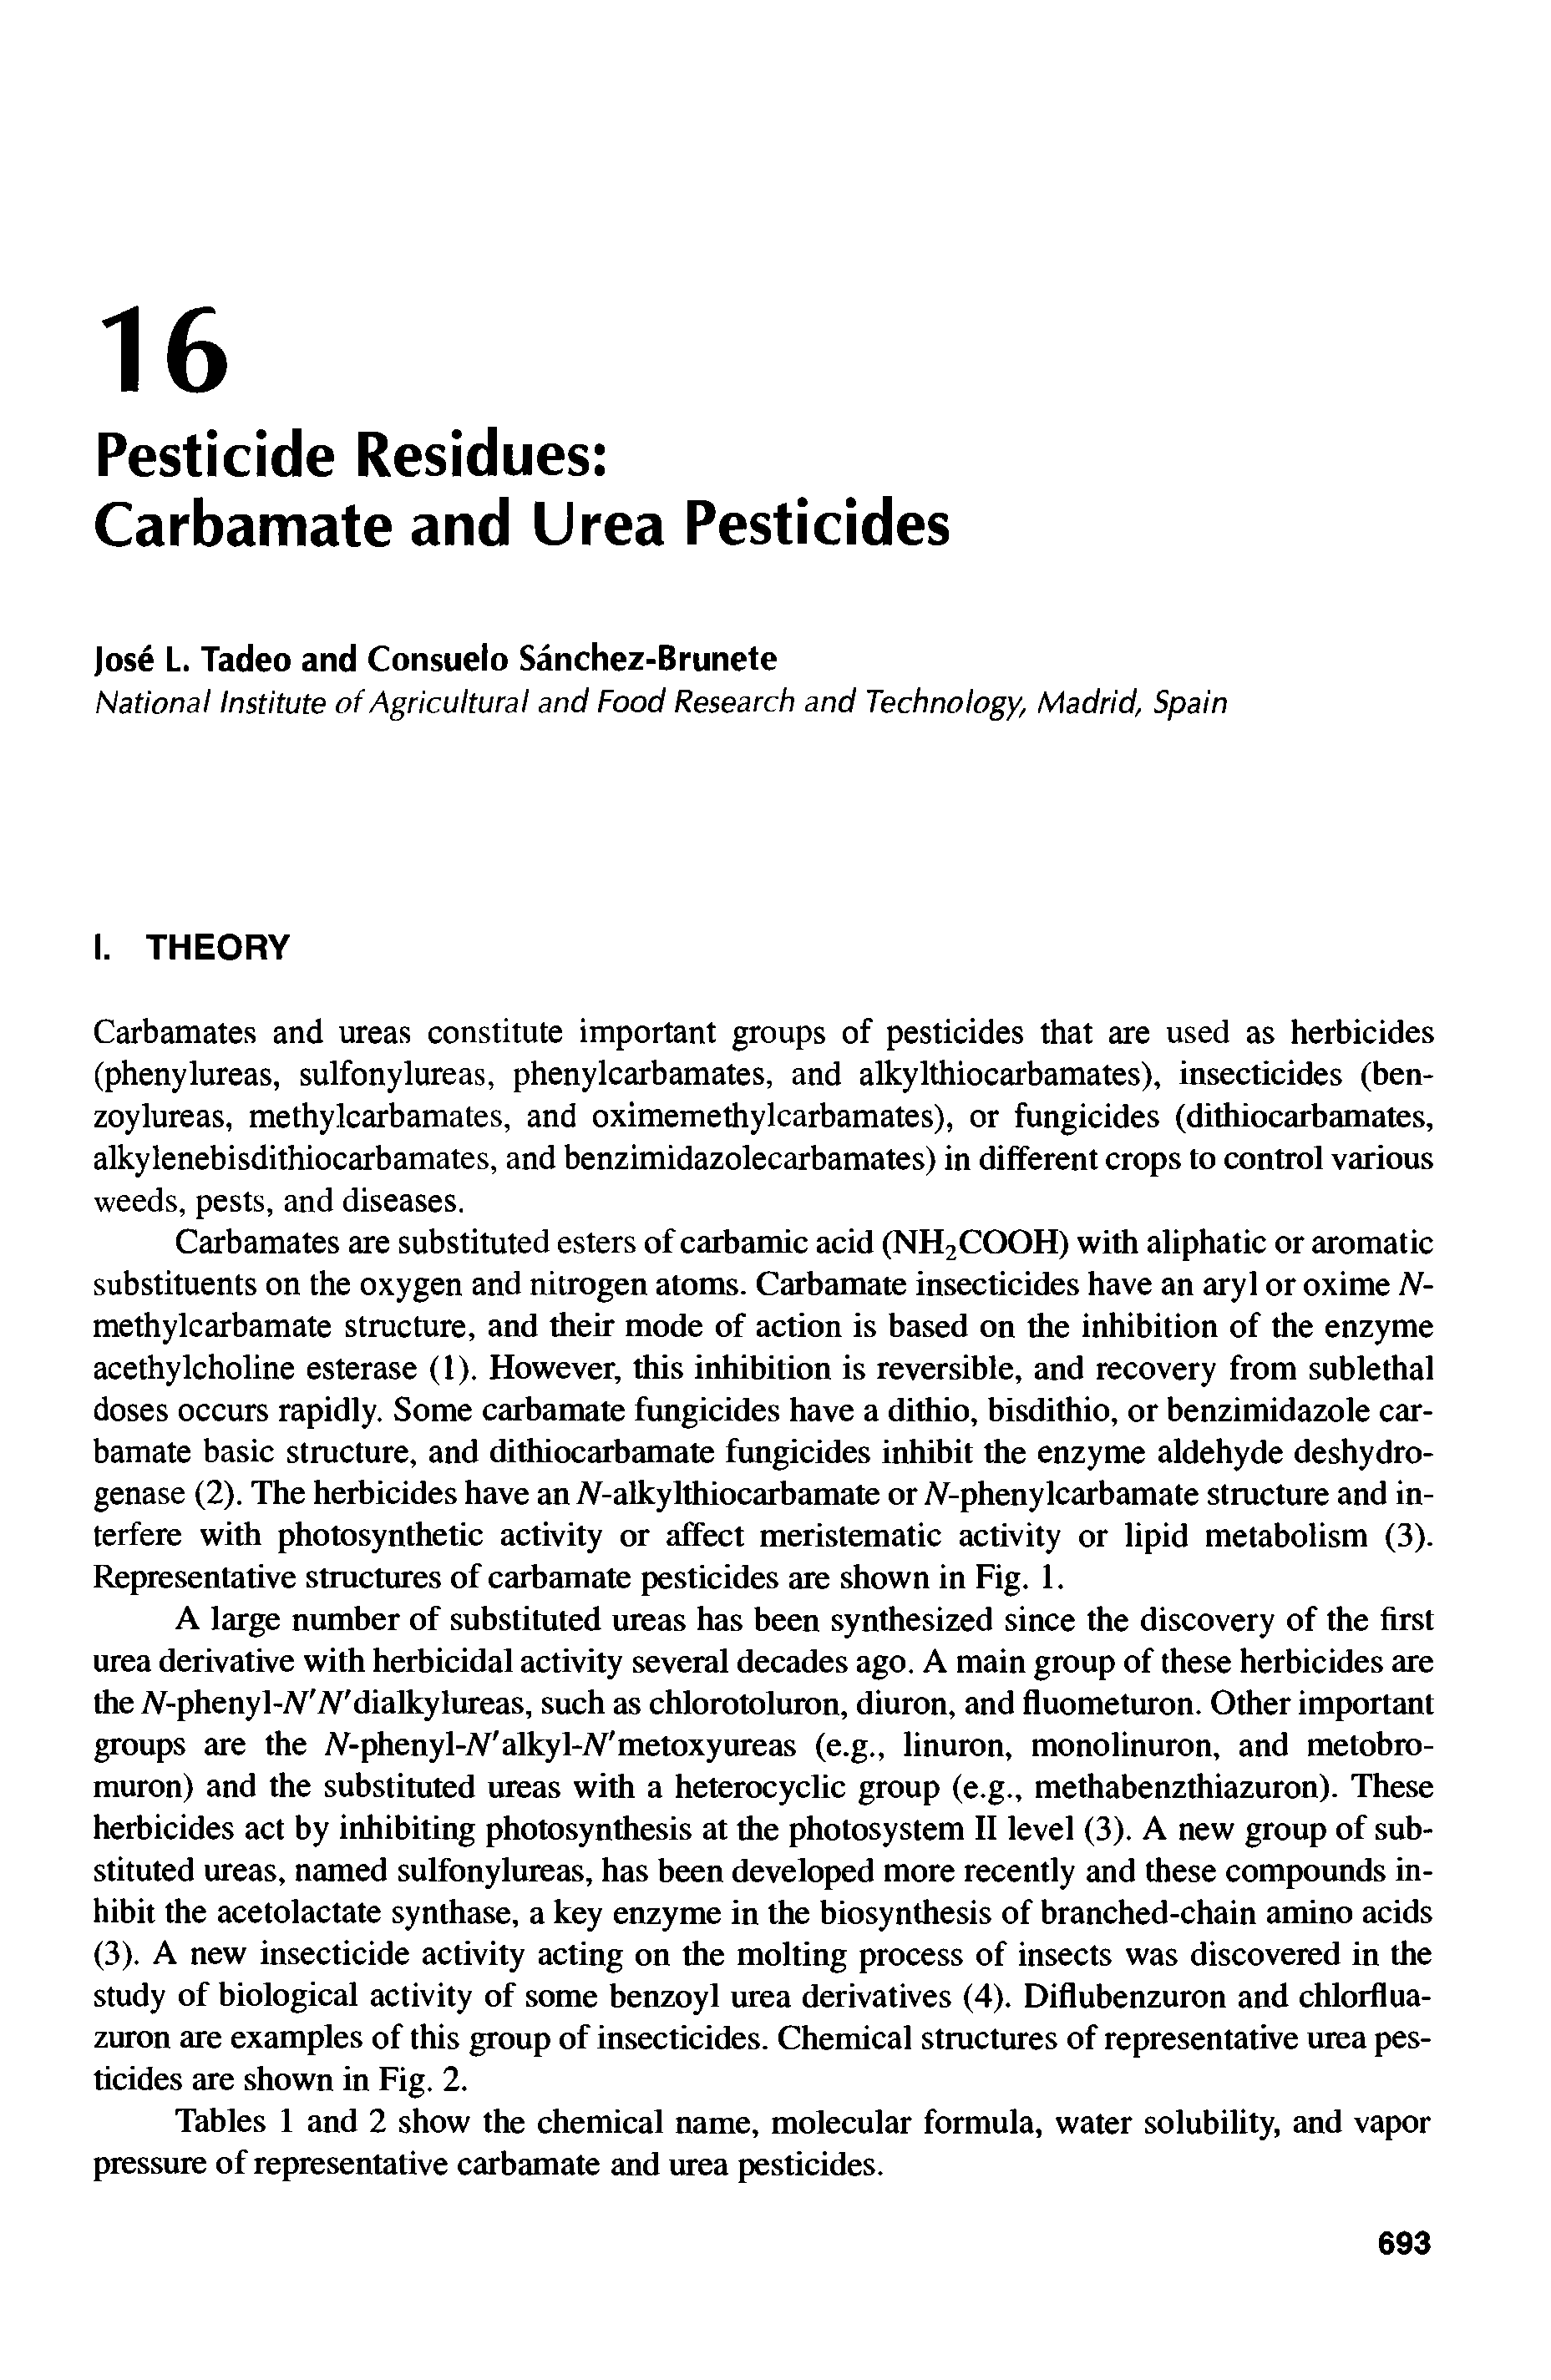 Tables 1 and 2 show the chemical name, molecular formula, water solubility, and vapor pressure of representative carbamate and urea pesticides.